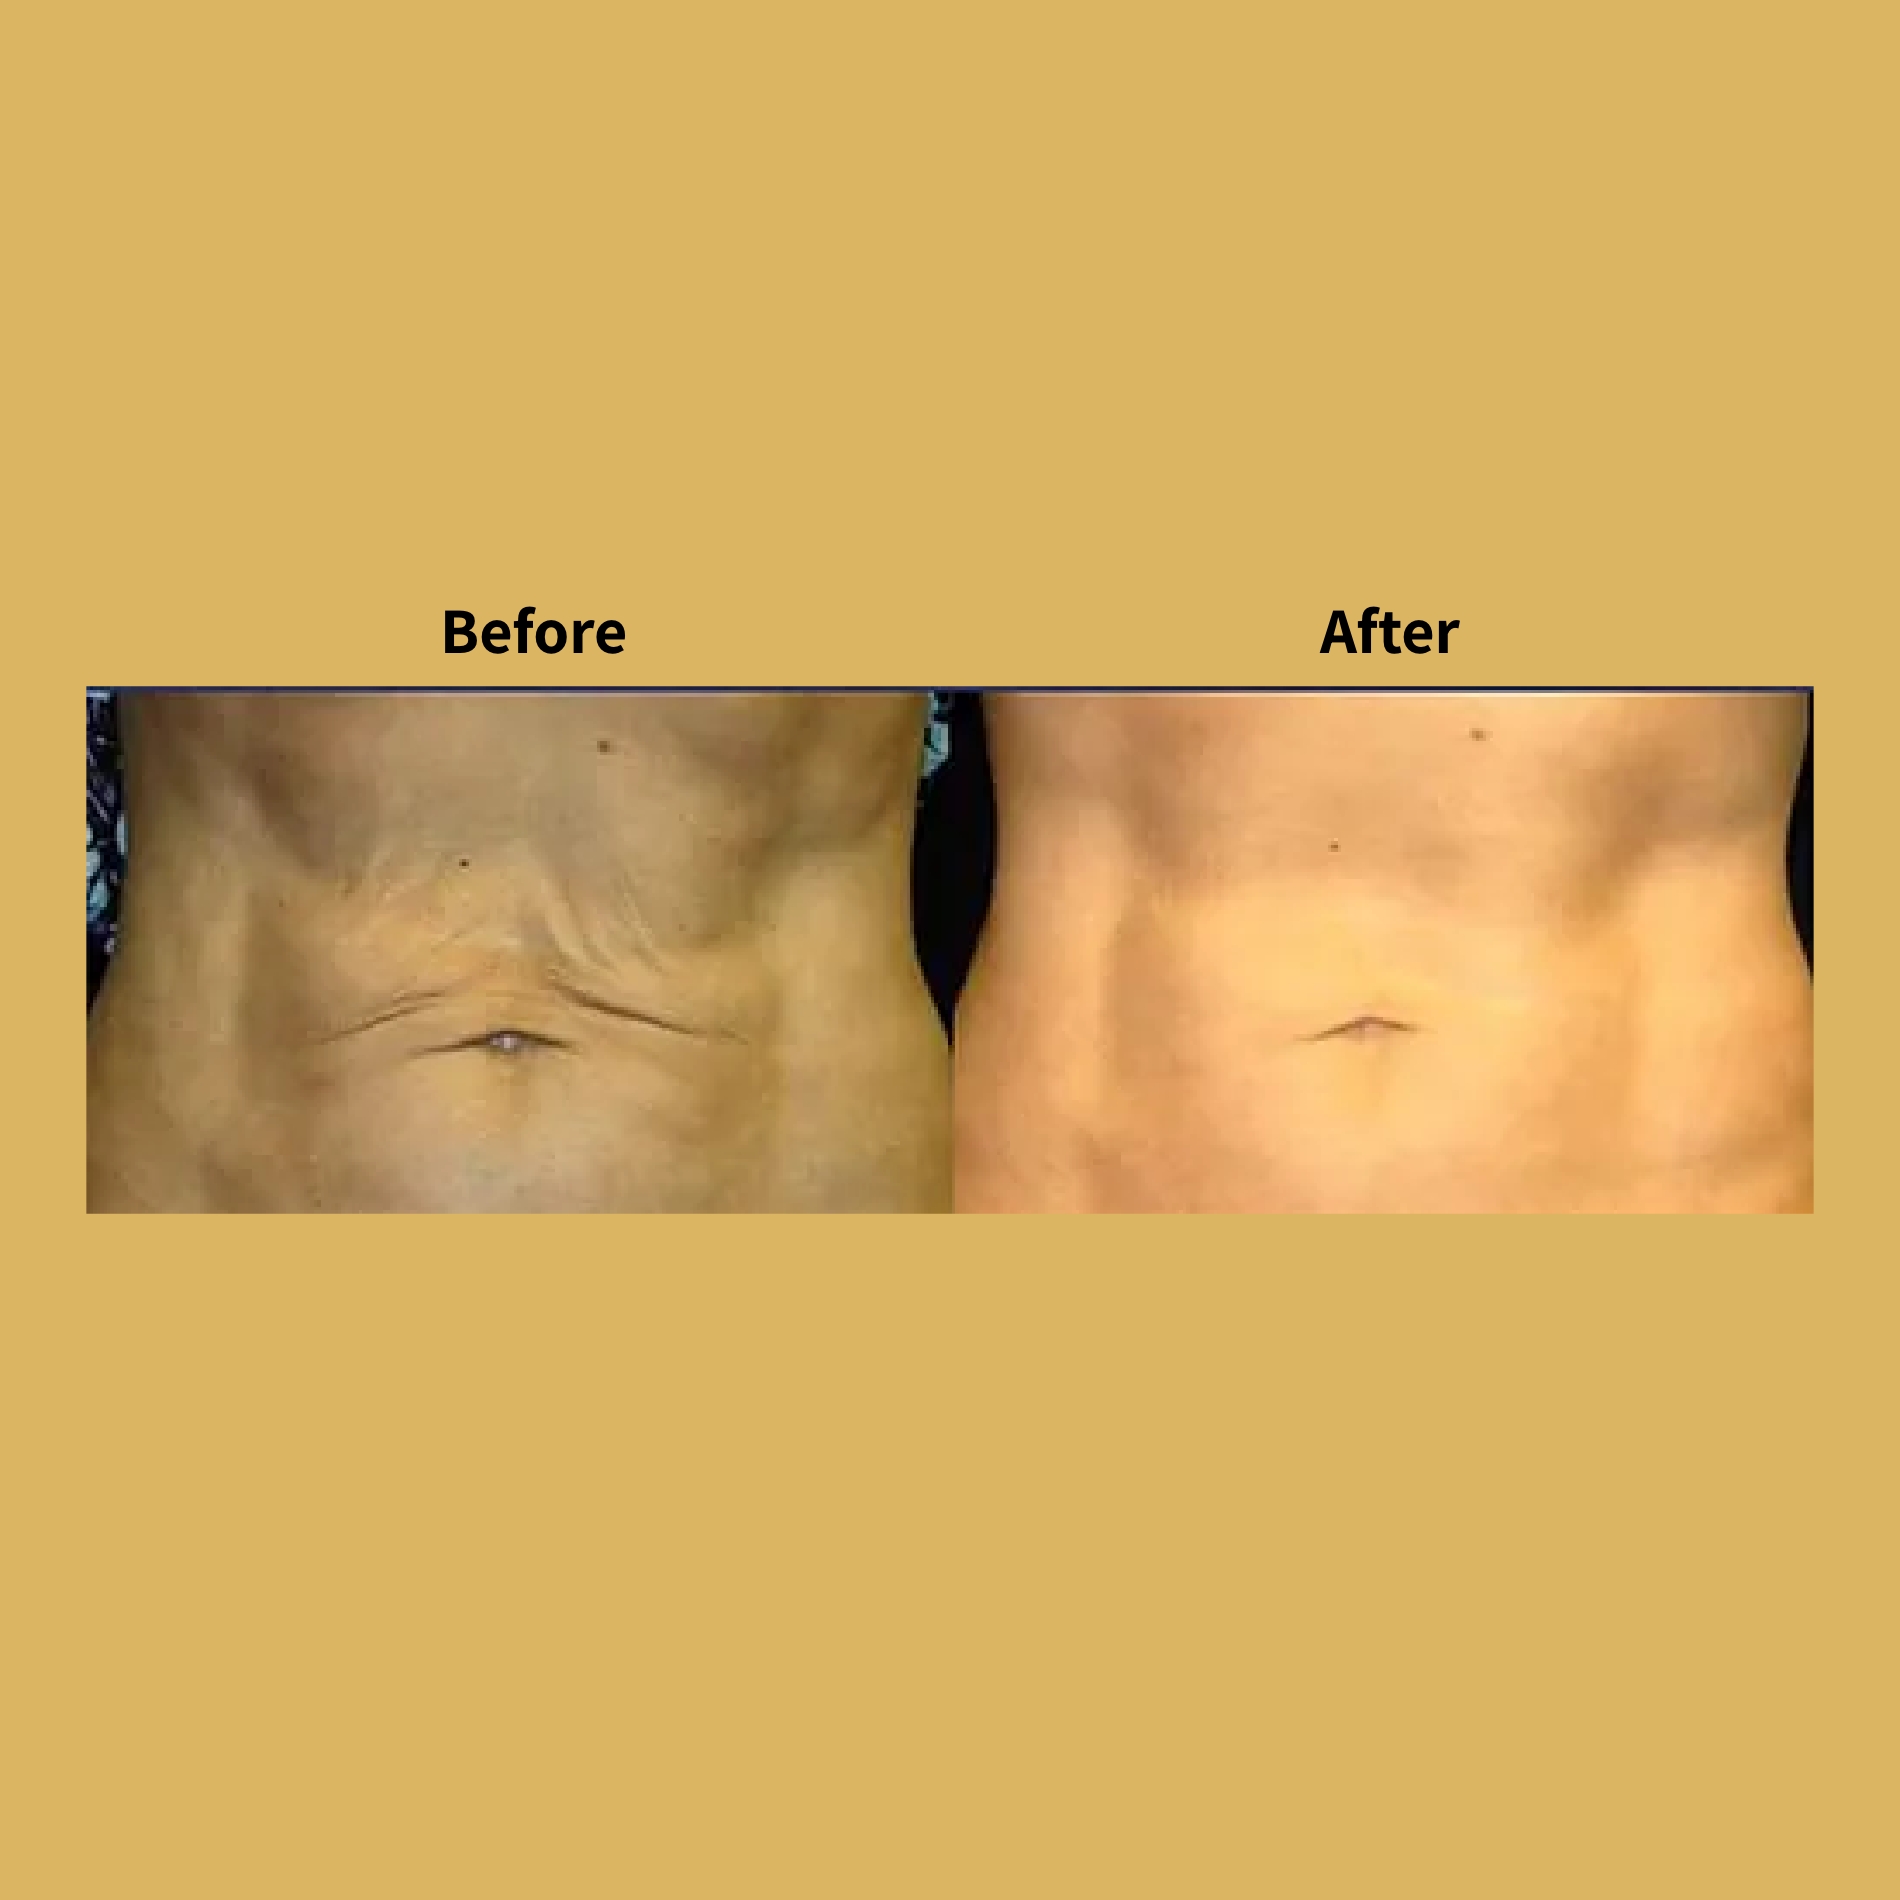 Titan Skin Tightening Treatment Before and After Photos | Soleil Medical & Beauty Spa in Portland, OR